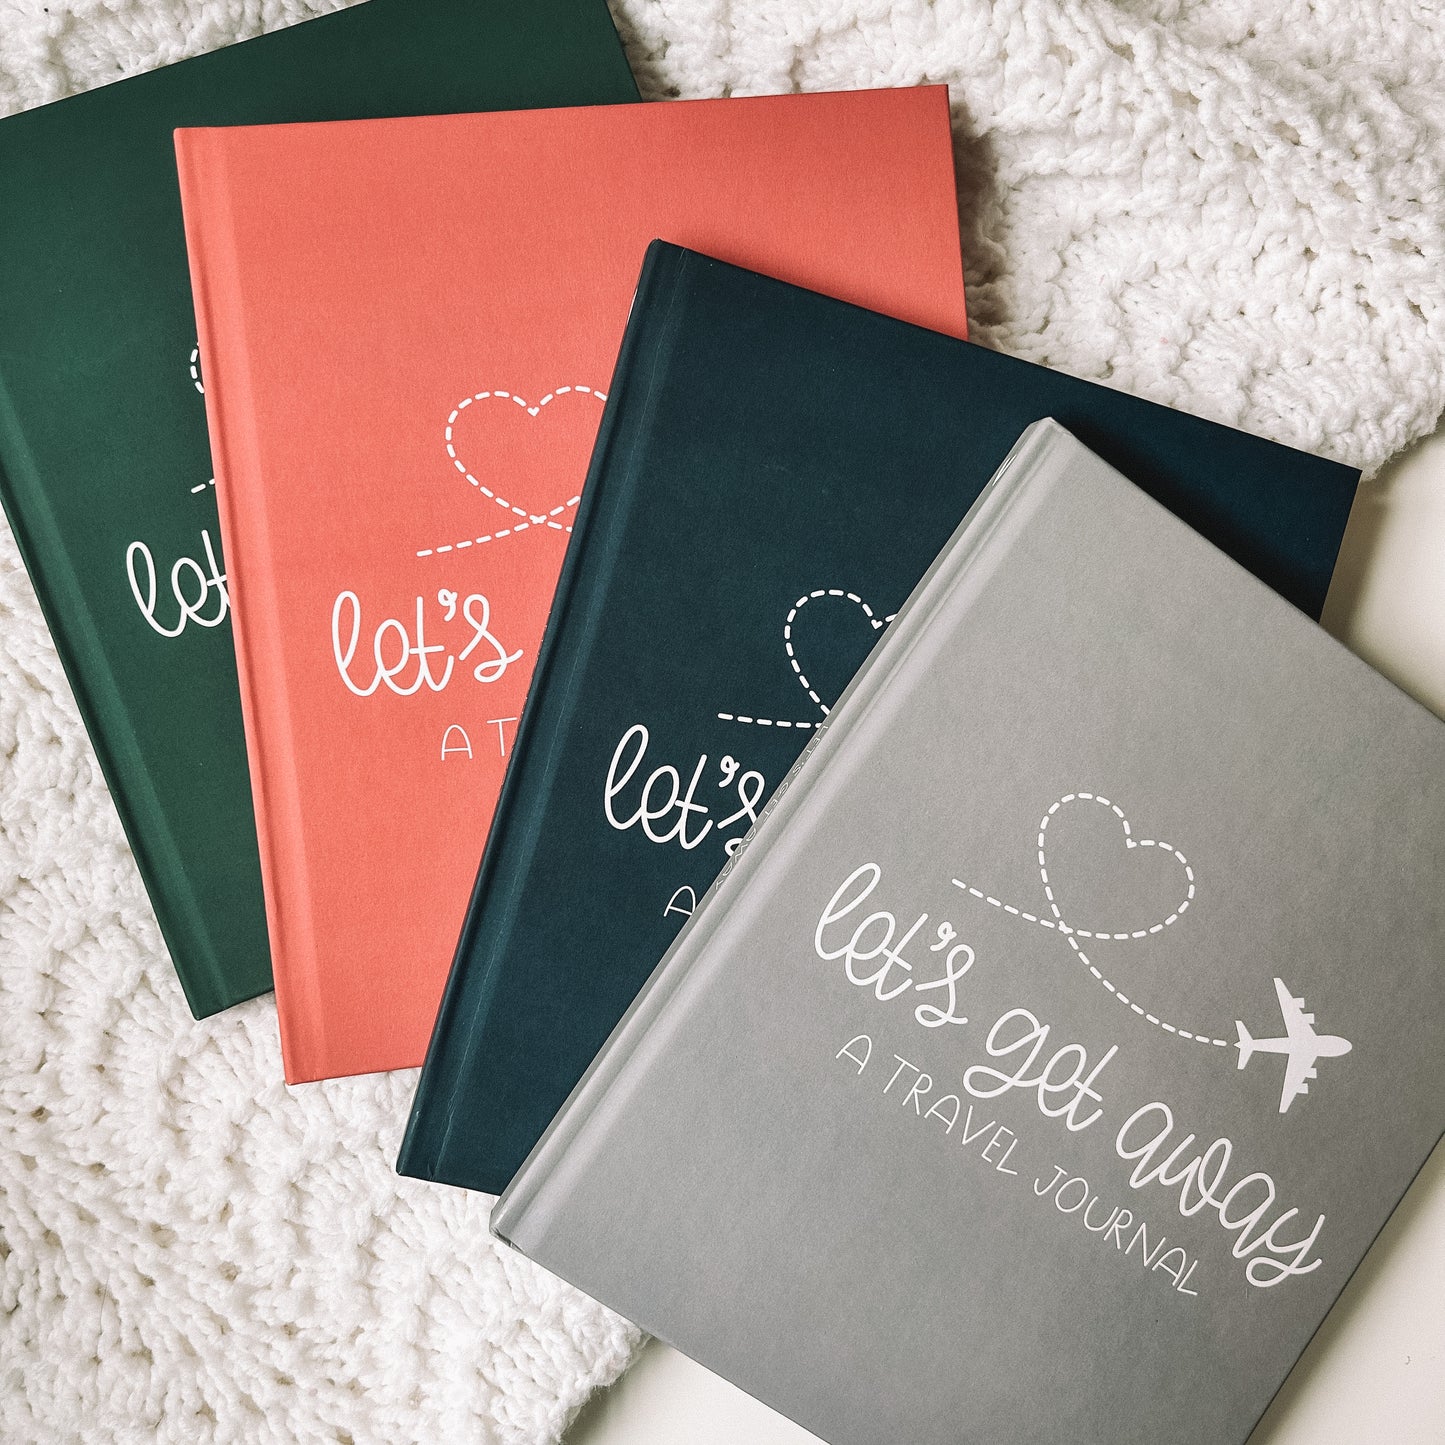 This keepsake travel journal is available in four colors which are forest green, navy blue, grey, and coral. All have white text that reads Lets Get Away A Travel Journal with a graphic of a white airplane leaving a heart trail behind it.